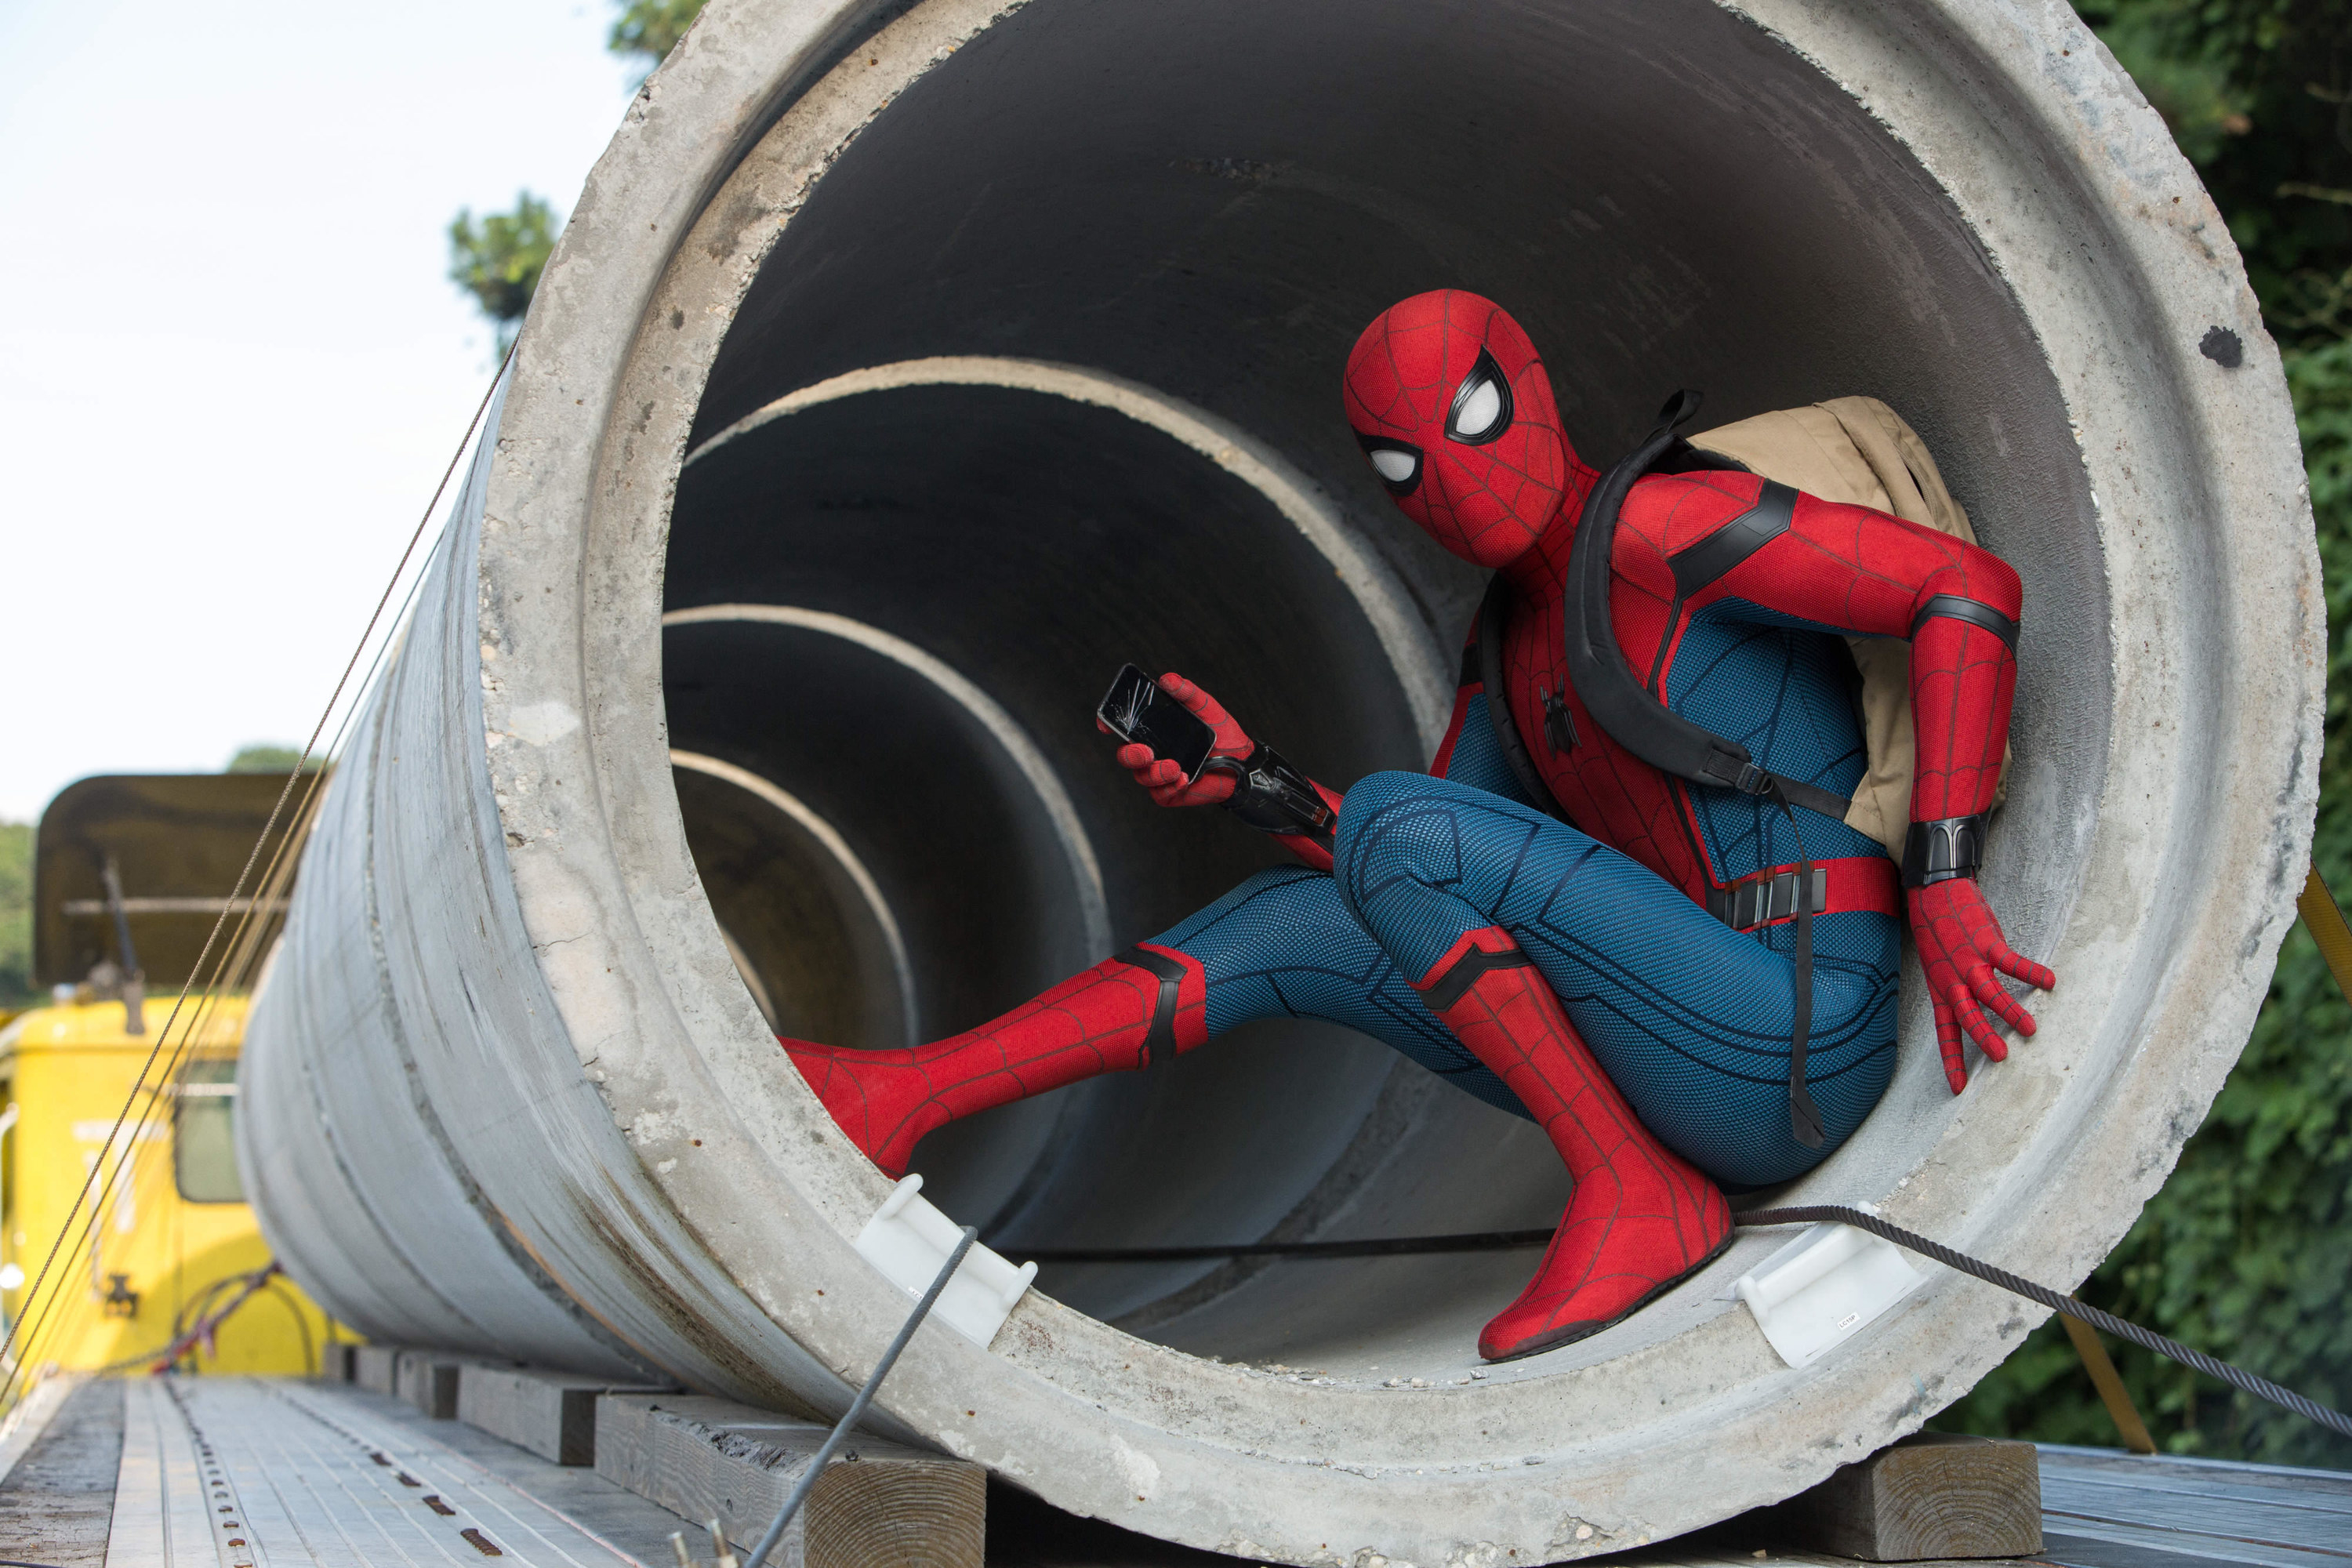 Spider-man lays low in a cement tube on a truck while wearing a backpack